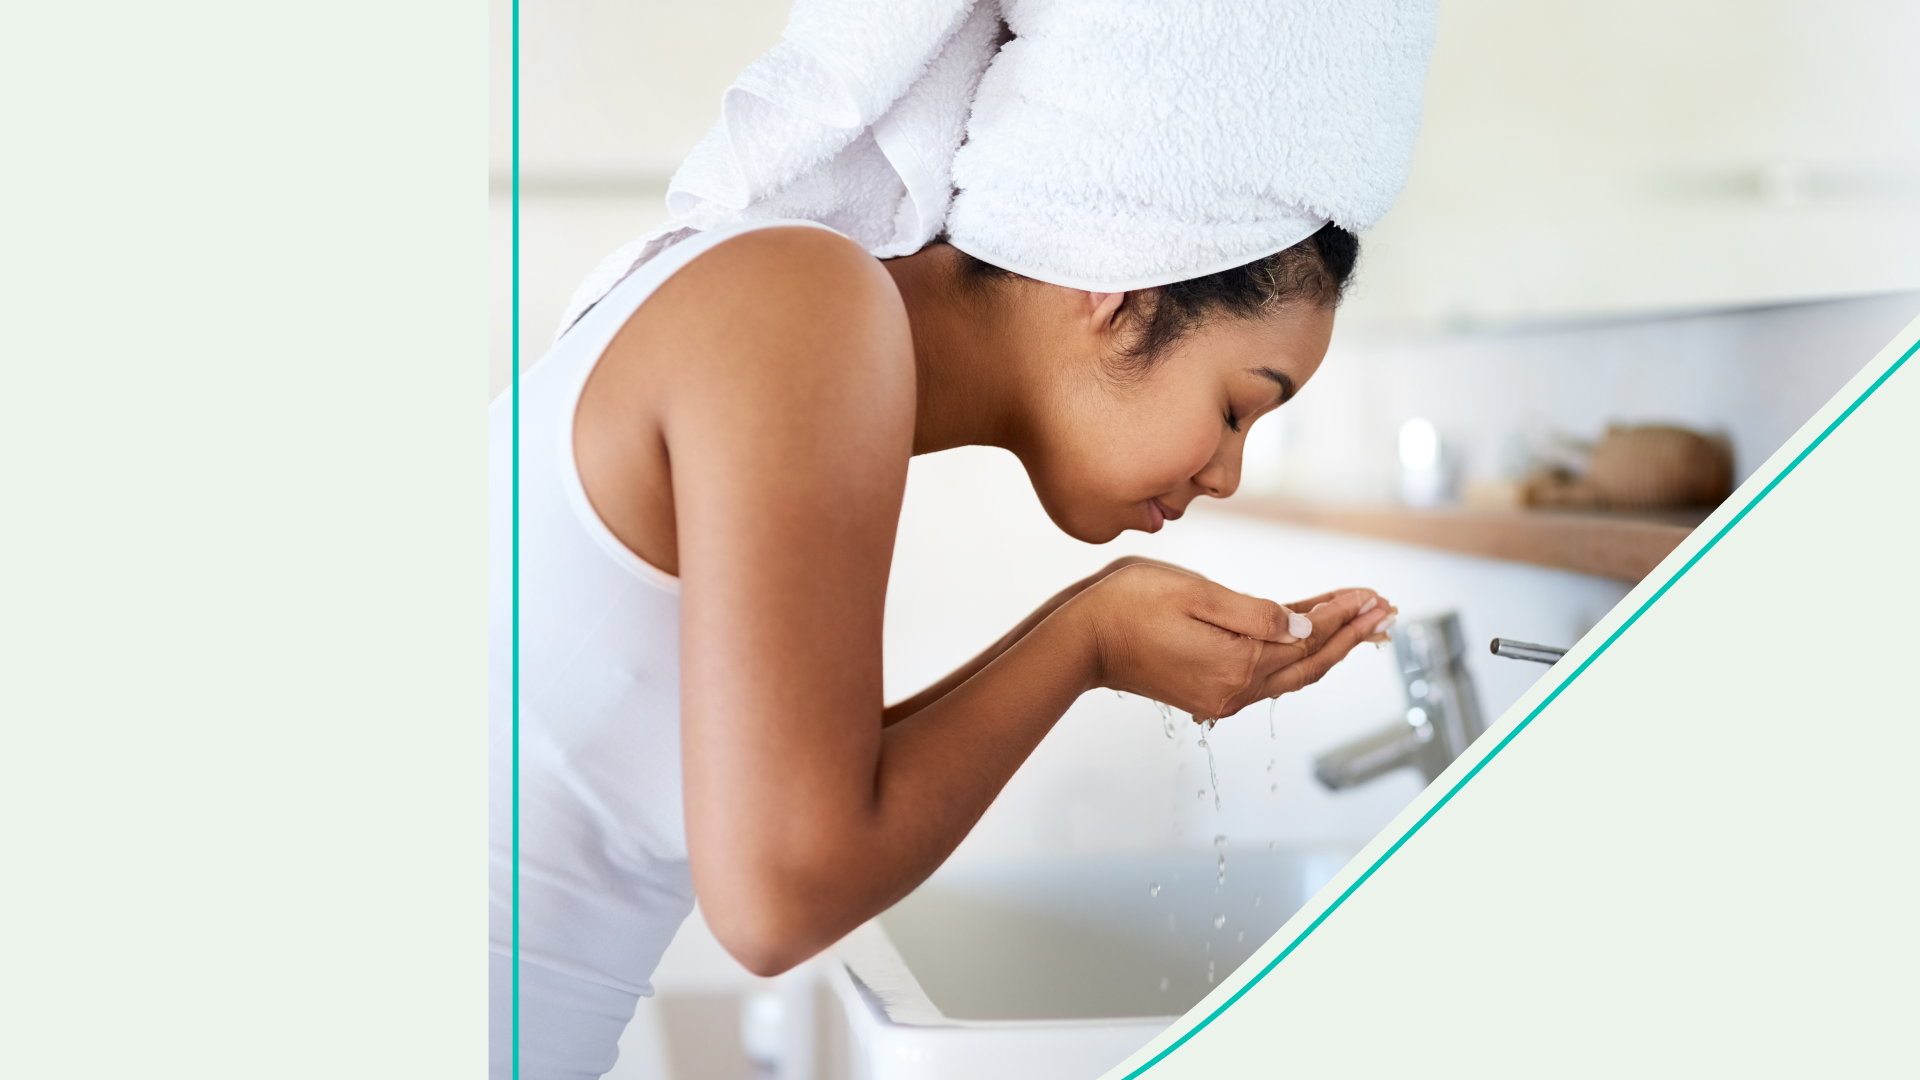 Woman washing face at sink with towel on head 